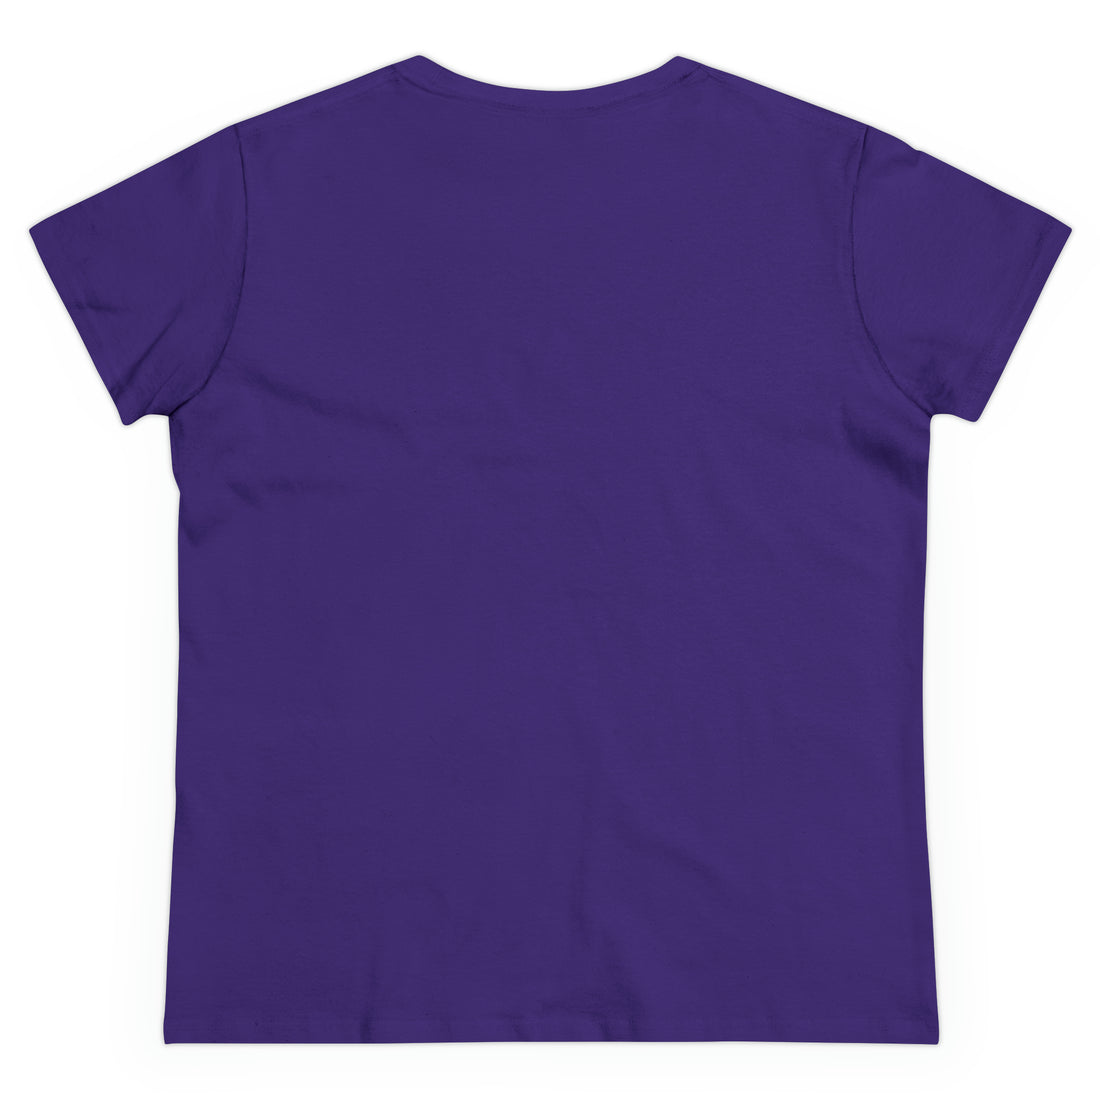 Pure Bliss Maggie Women's Midweight Cotton Tee